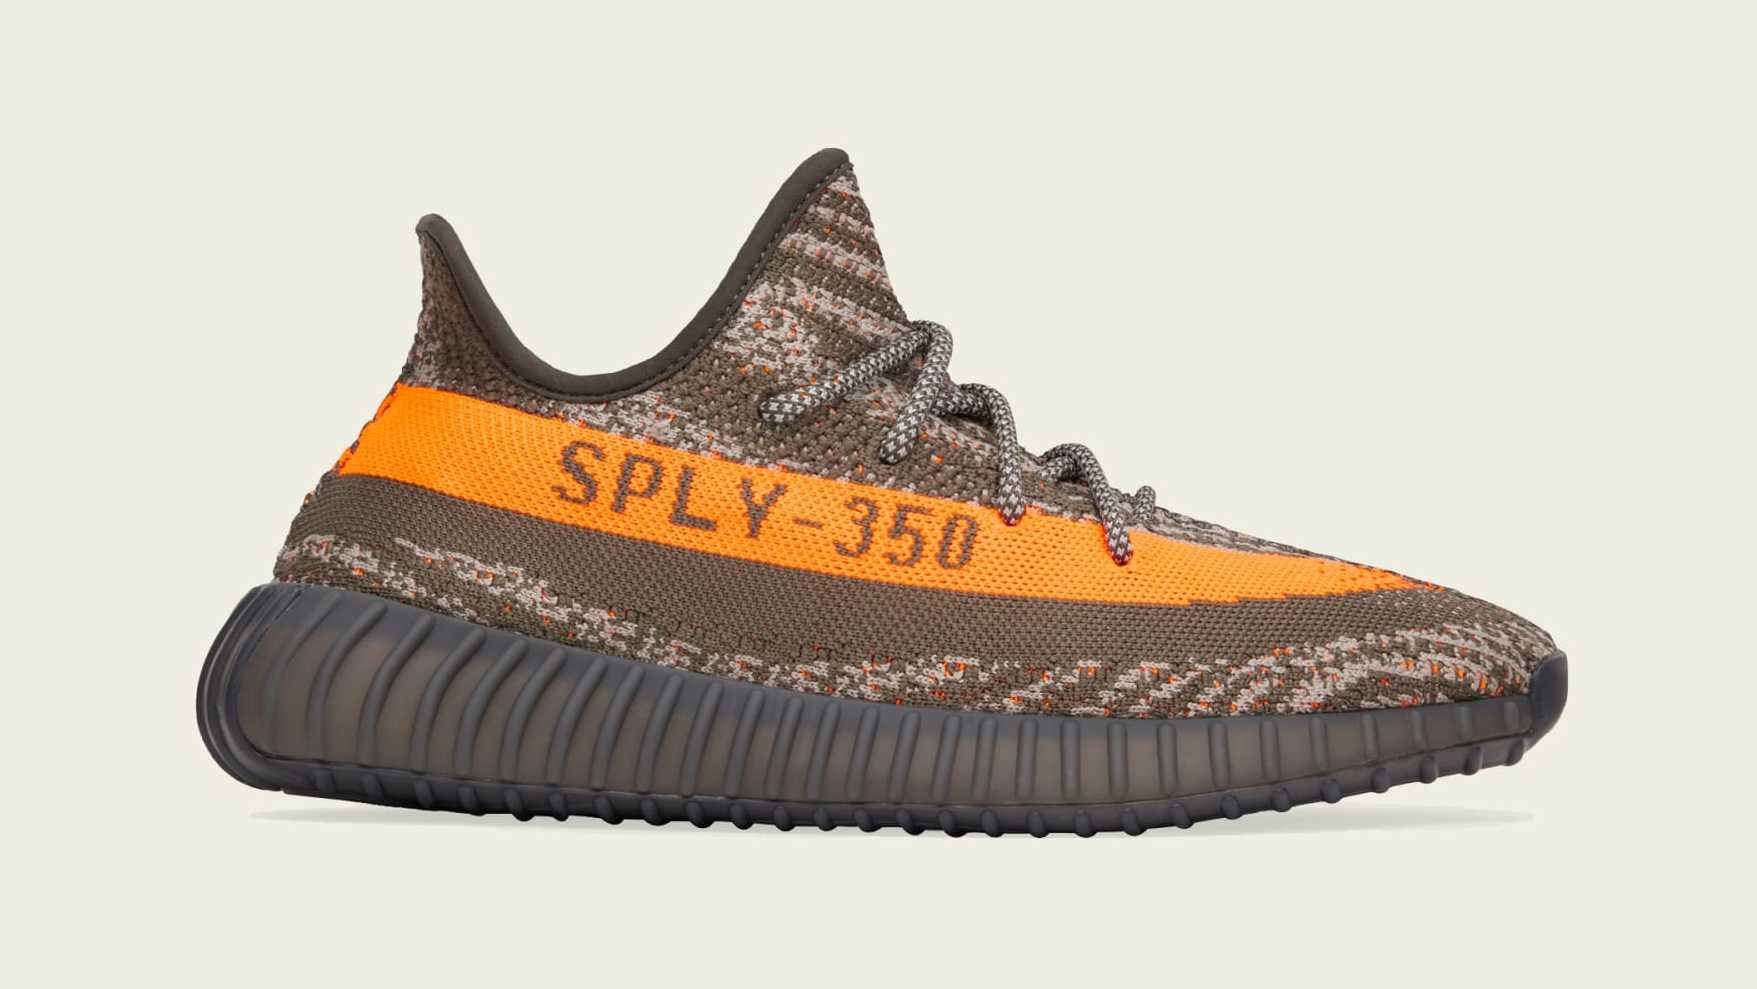 Adidas Yeezy Boost 350 V2 'Carbon Beluga' HQ7045 Lateral